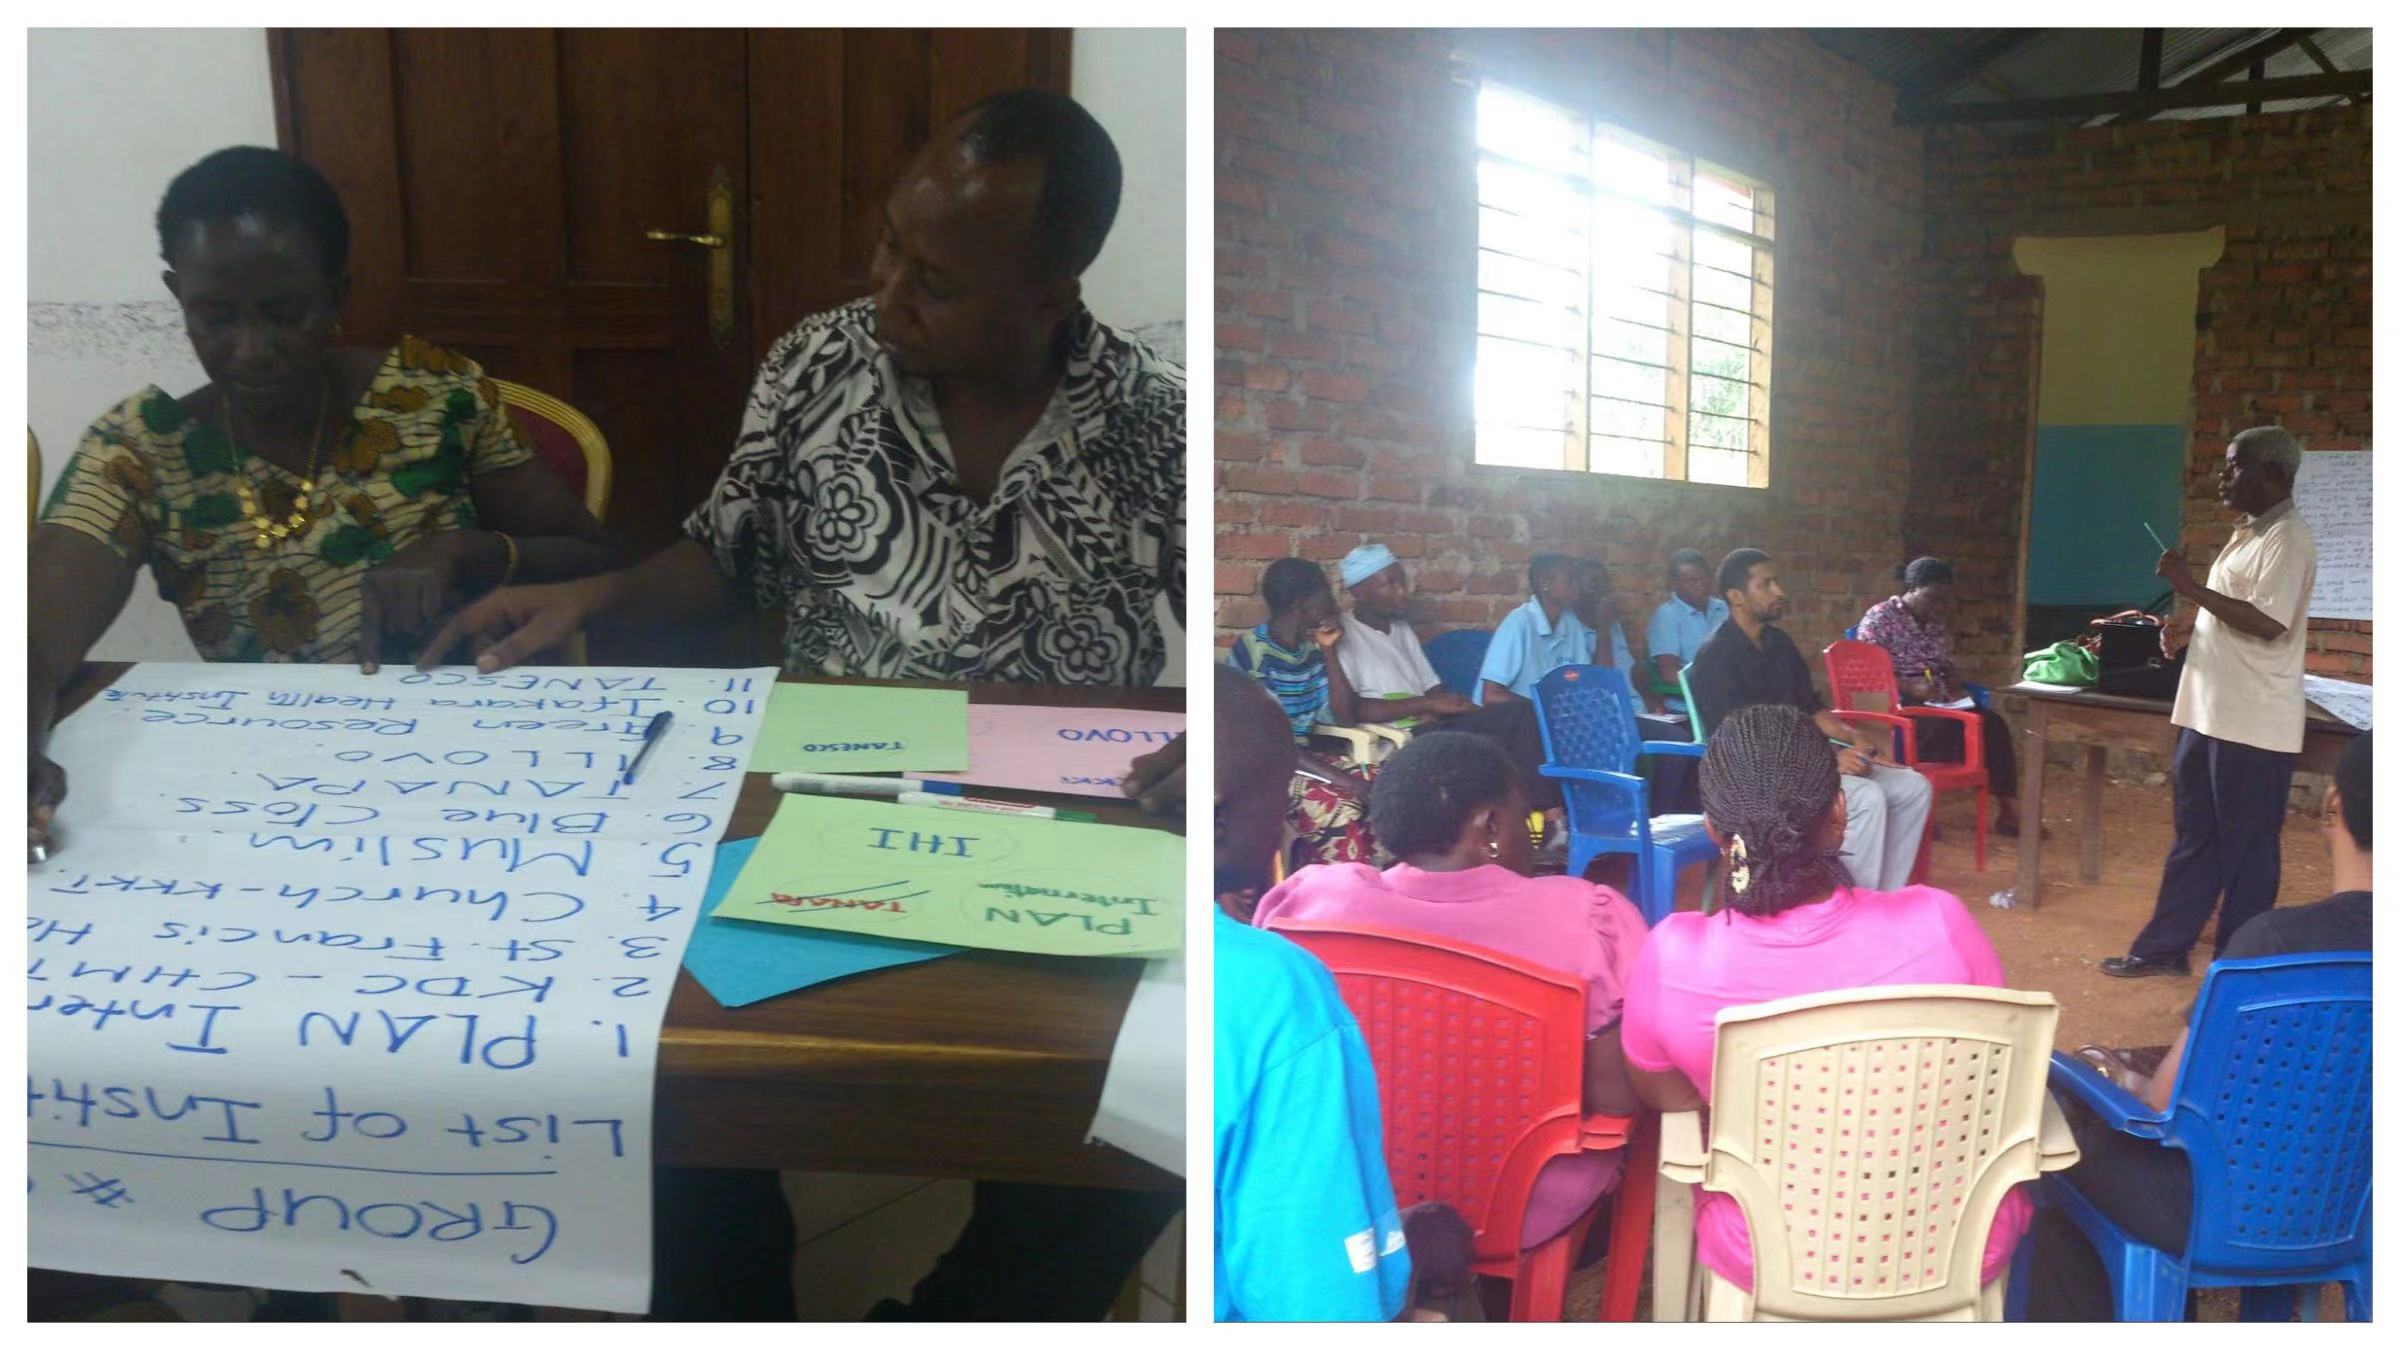 L: Project facilitators learning participatory approaches for community health in rural Morogoro, Tanzania, 2014 R: Speaking to traditional birth attendants in rural Morogoro, Tanzania, 2014